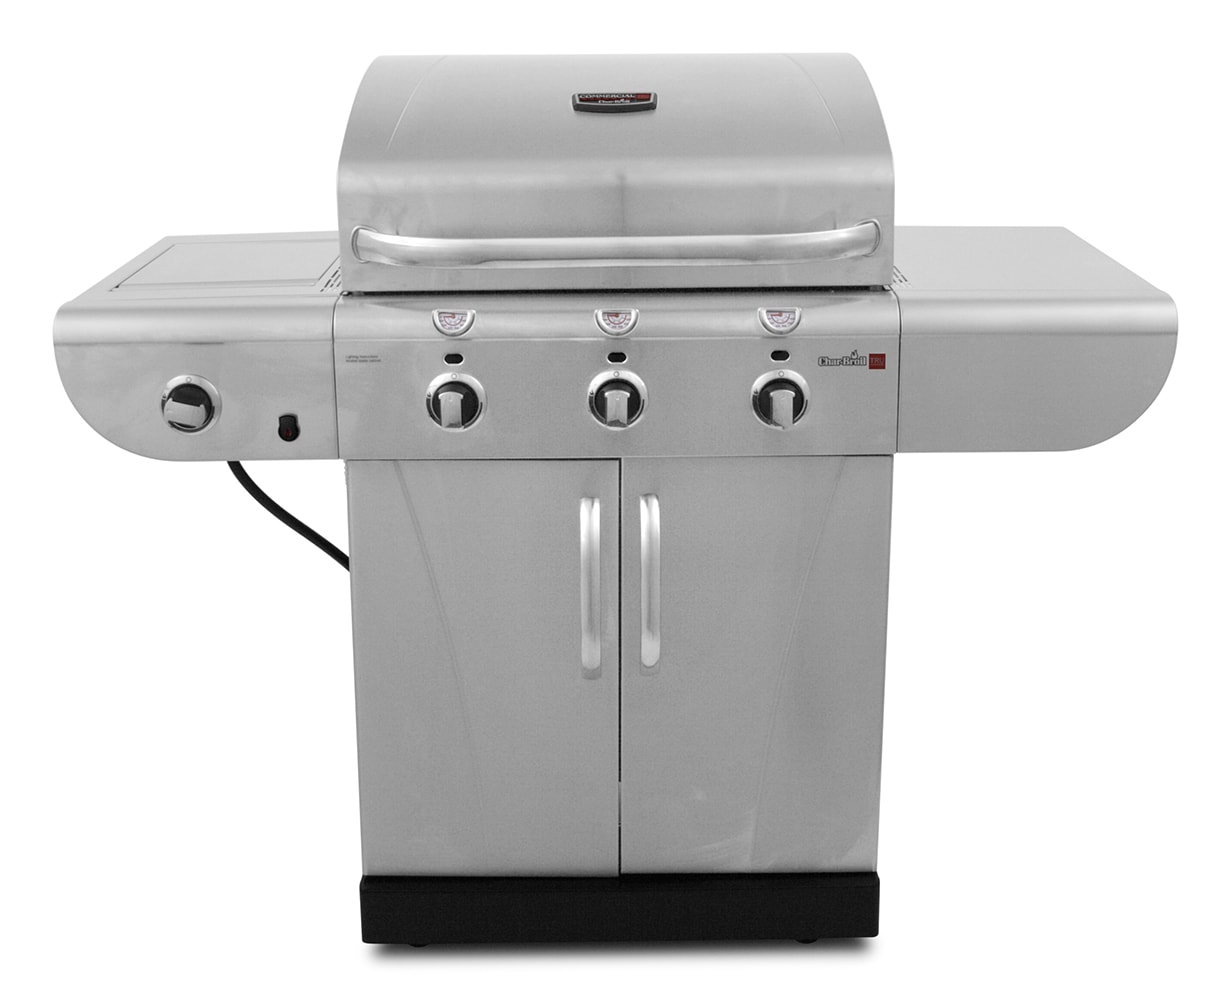 Char-Broil Commercial Series Stainless Liquid Propane Infrared Gas Grill 1 Side Burner at Lowes.com